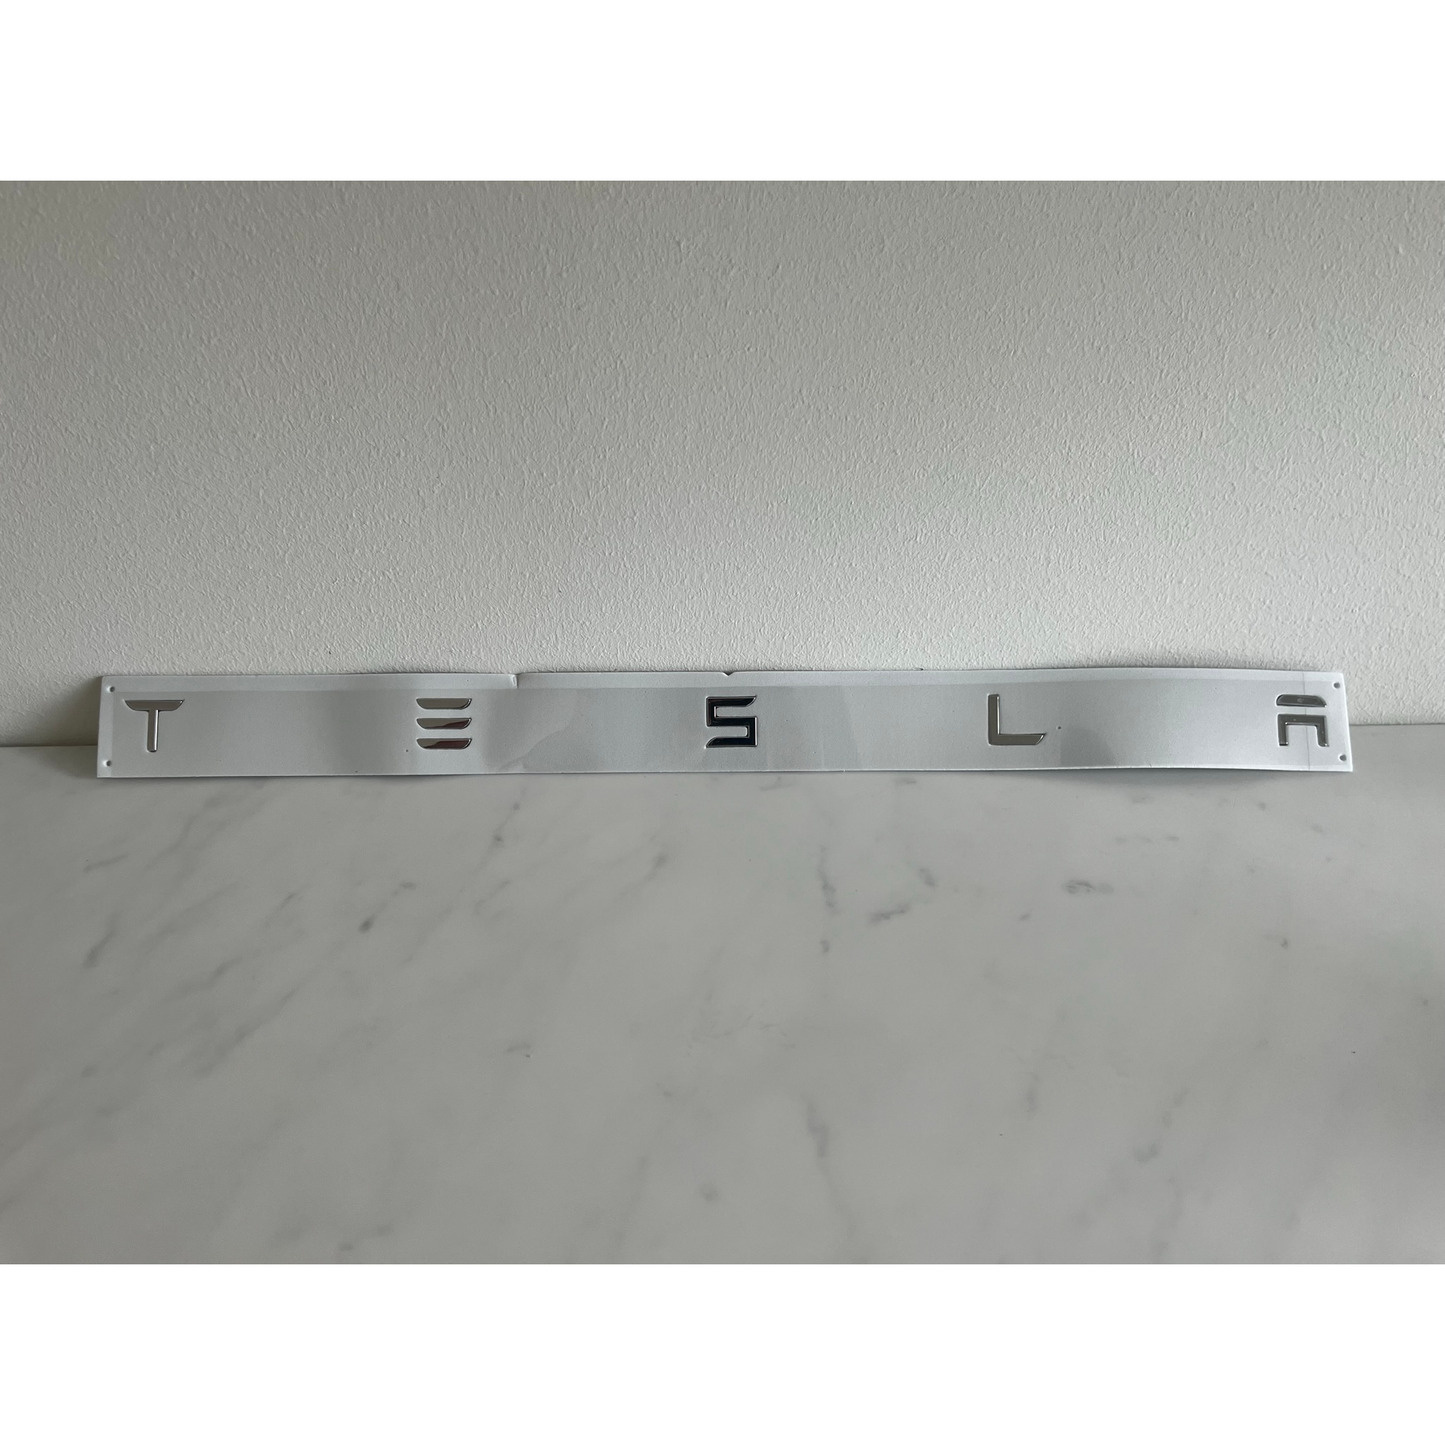 Tesla Letters for Tailgate